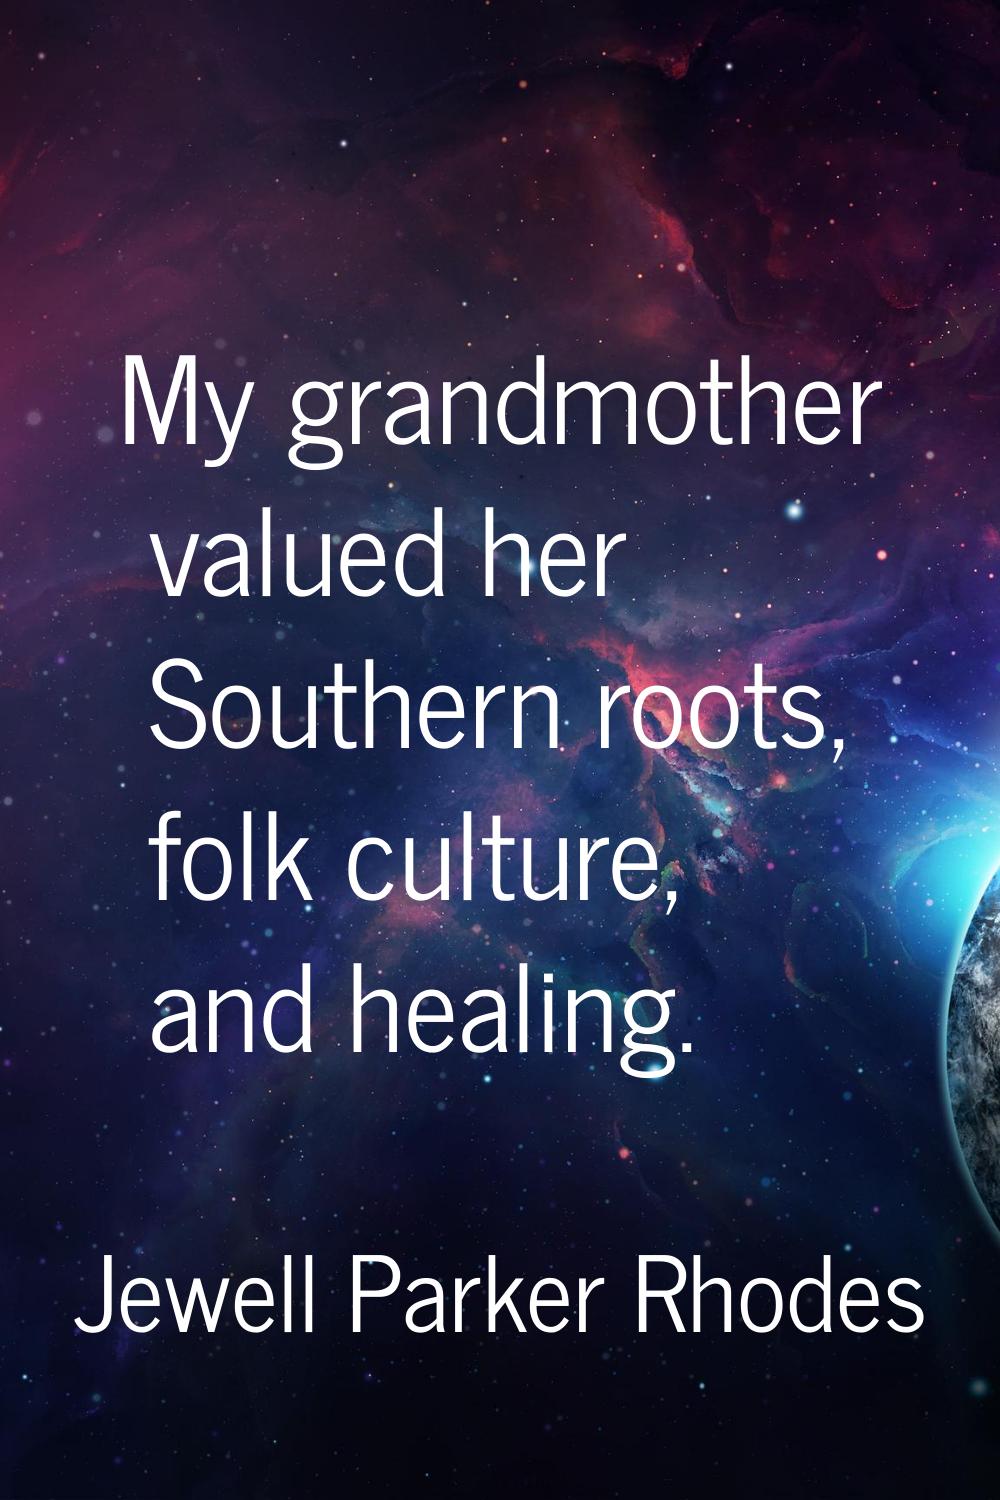 My grandmother valued her Southern roots, folk culture, and healing.